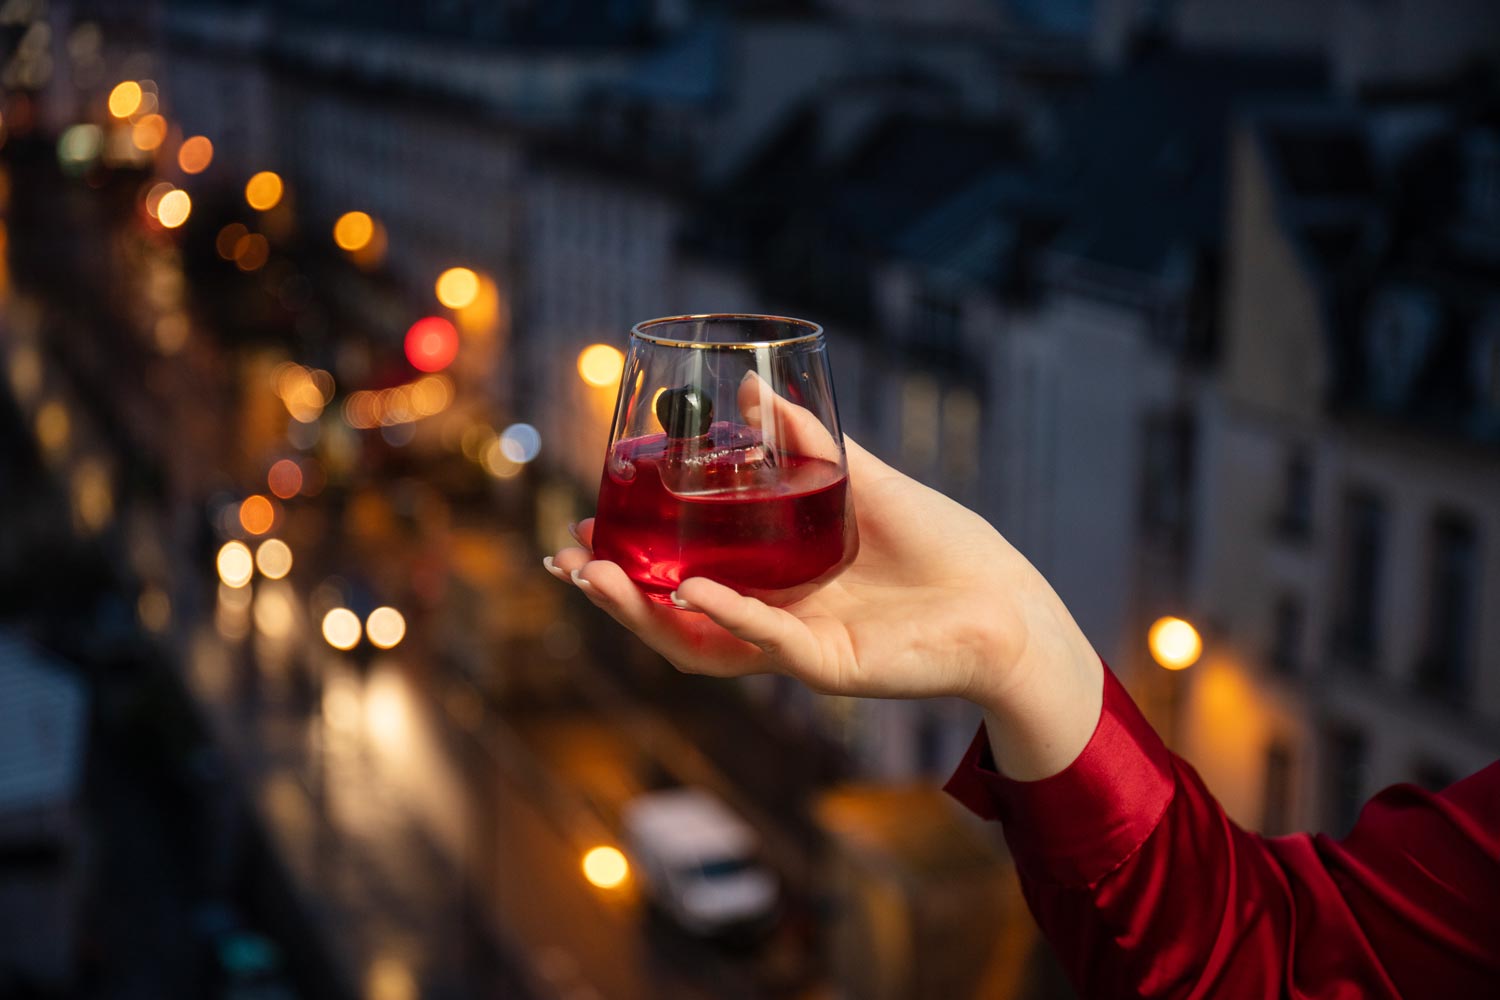 A hand holds a red drink over a scenic view. In the background it is night, and the street is illuminated by car headlights and streetlights.